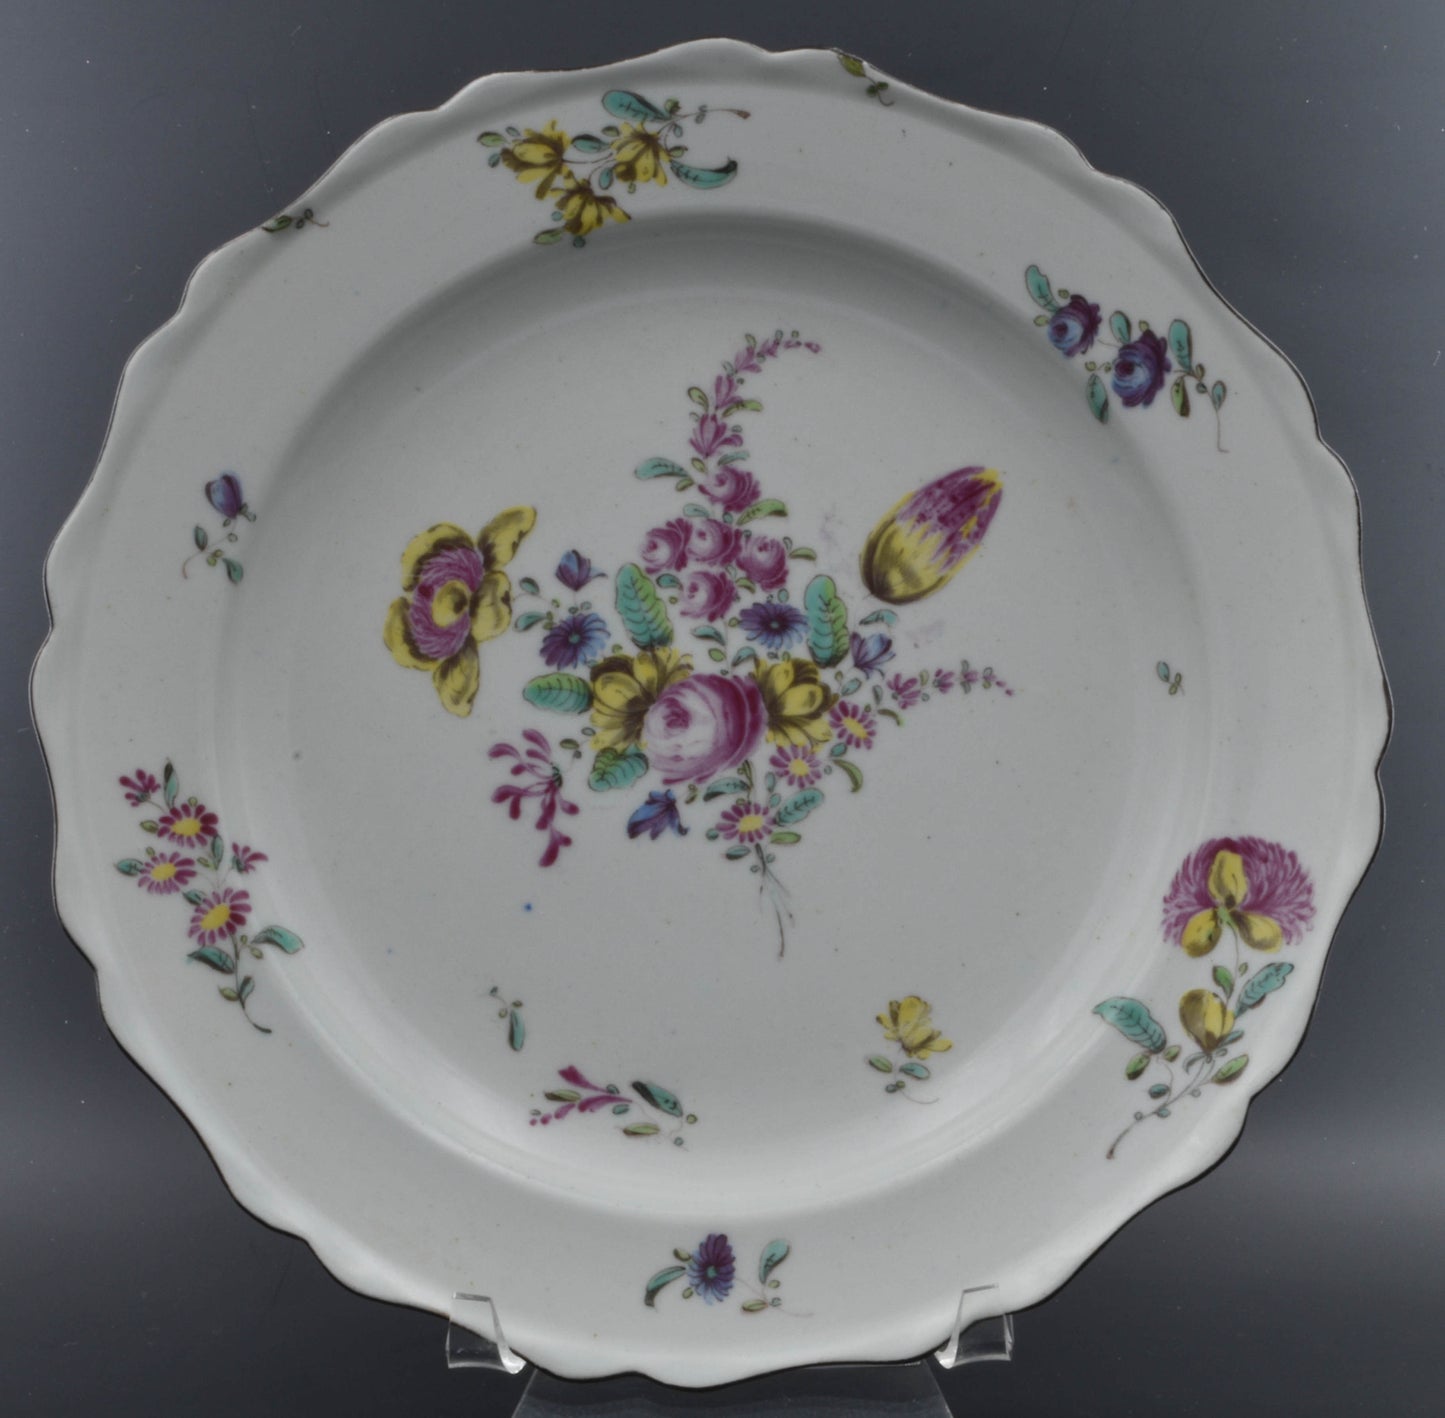 Bow Plate, in the style of Chelsea, with flowers